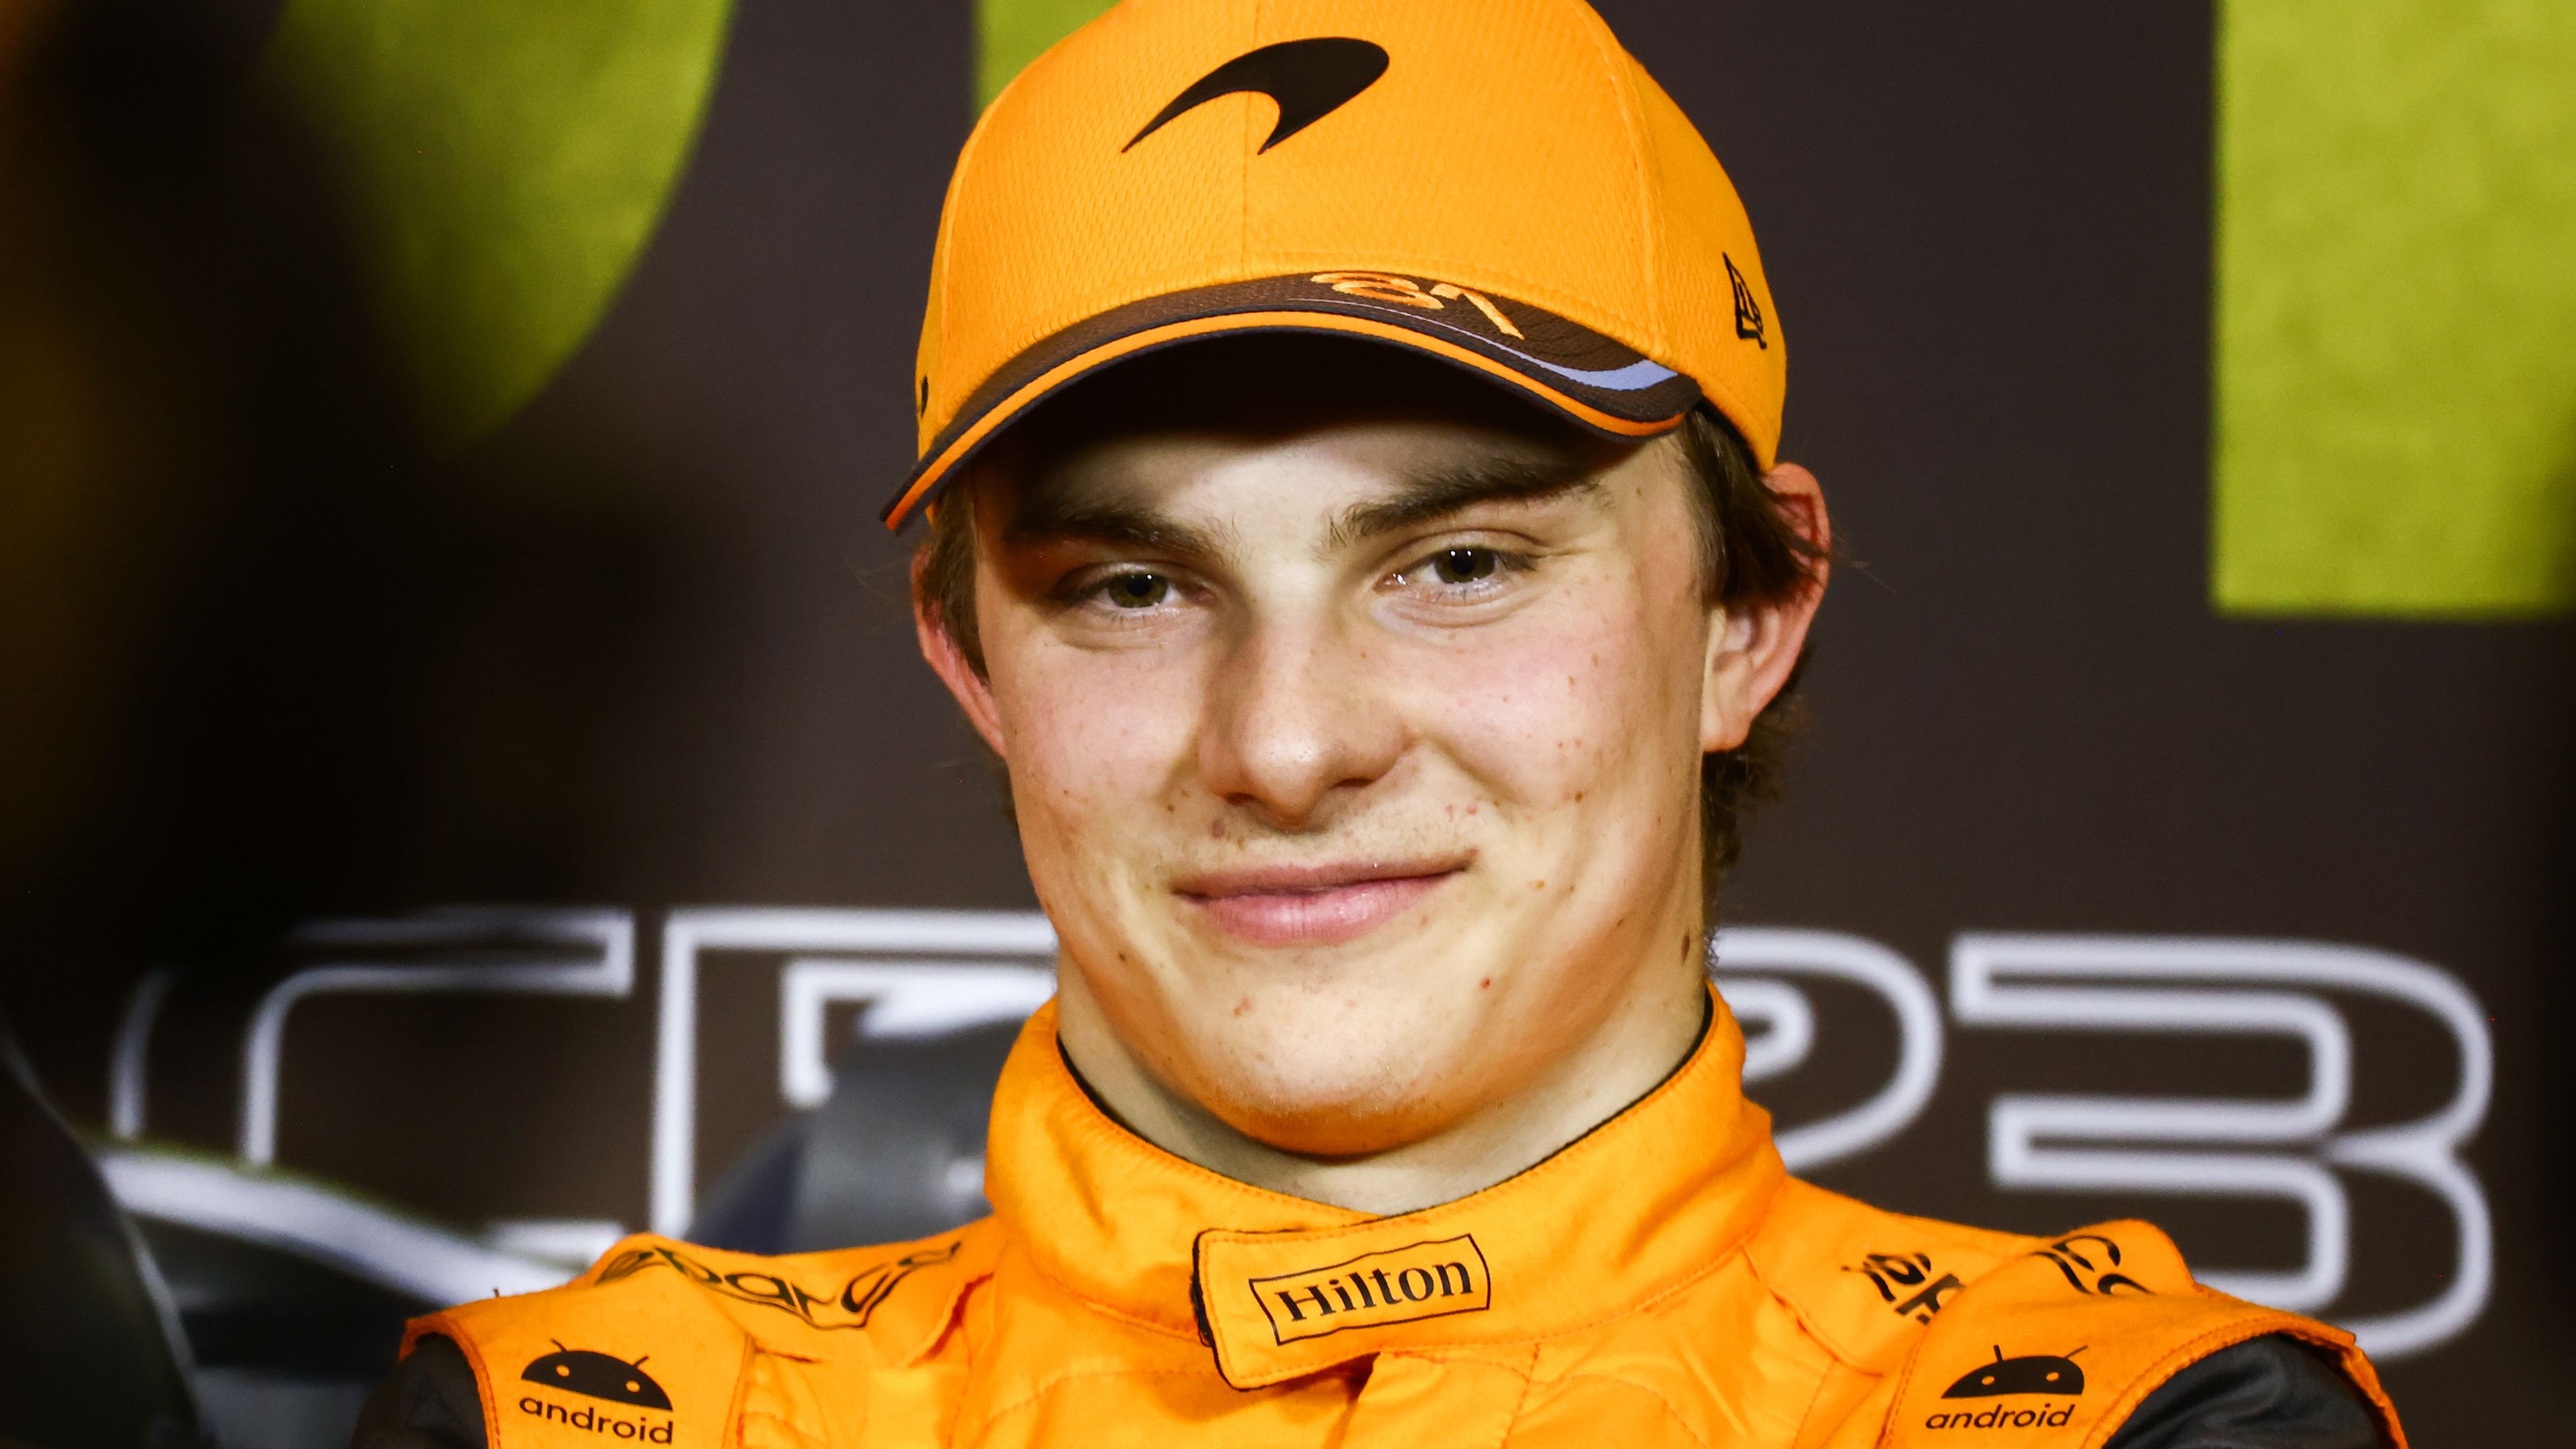 Oscar Piastri of McLaren during a press conference after qualifying ahead of Formula 1 Abu Dhabi Grand Prix.